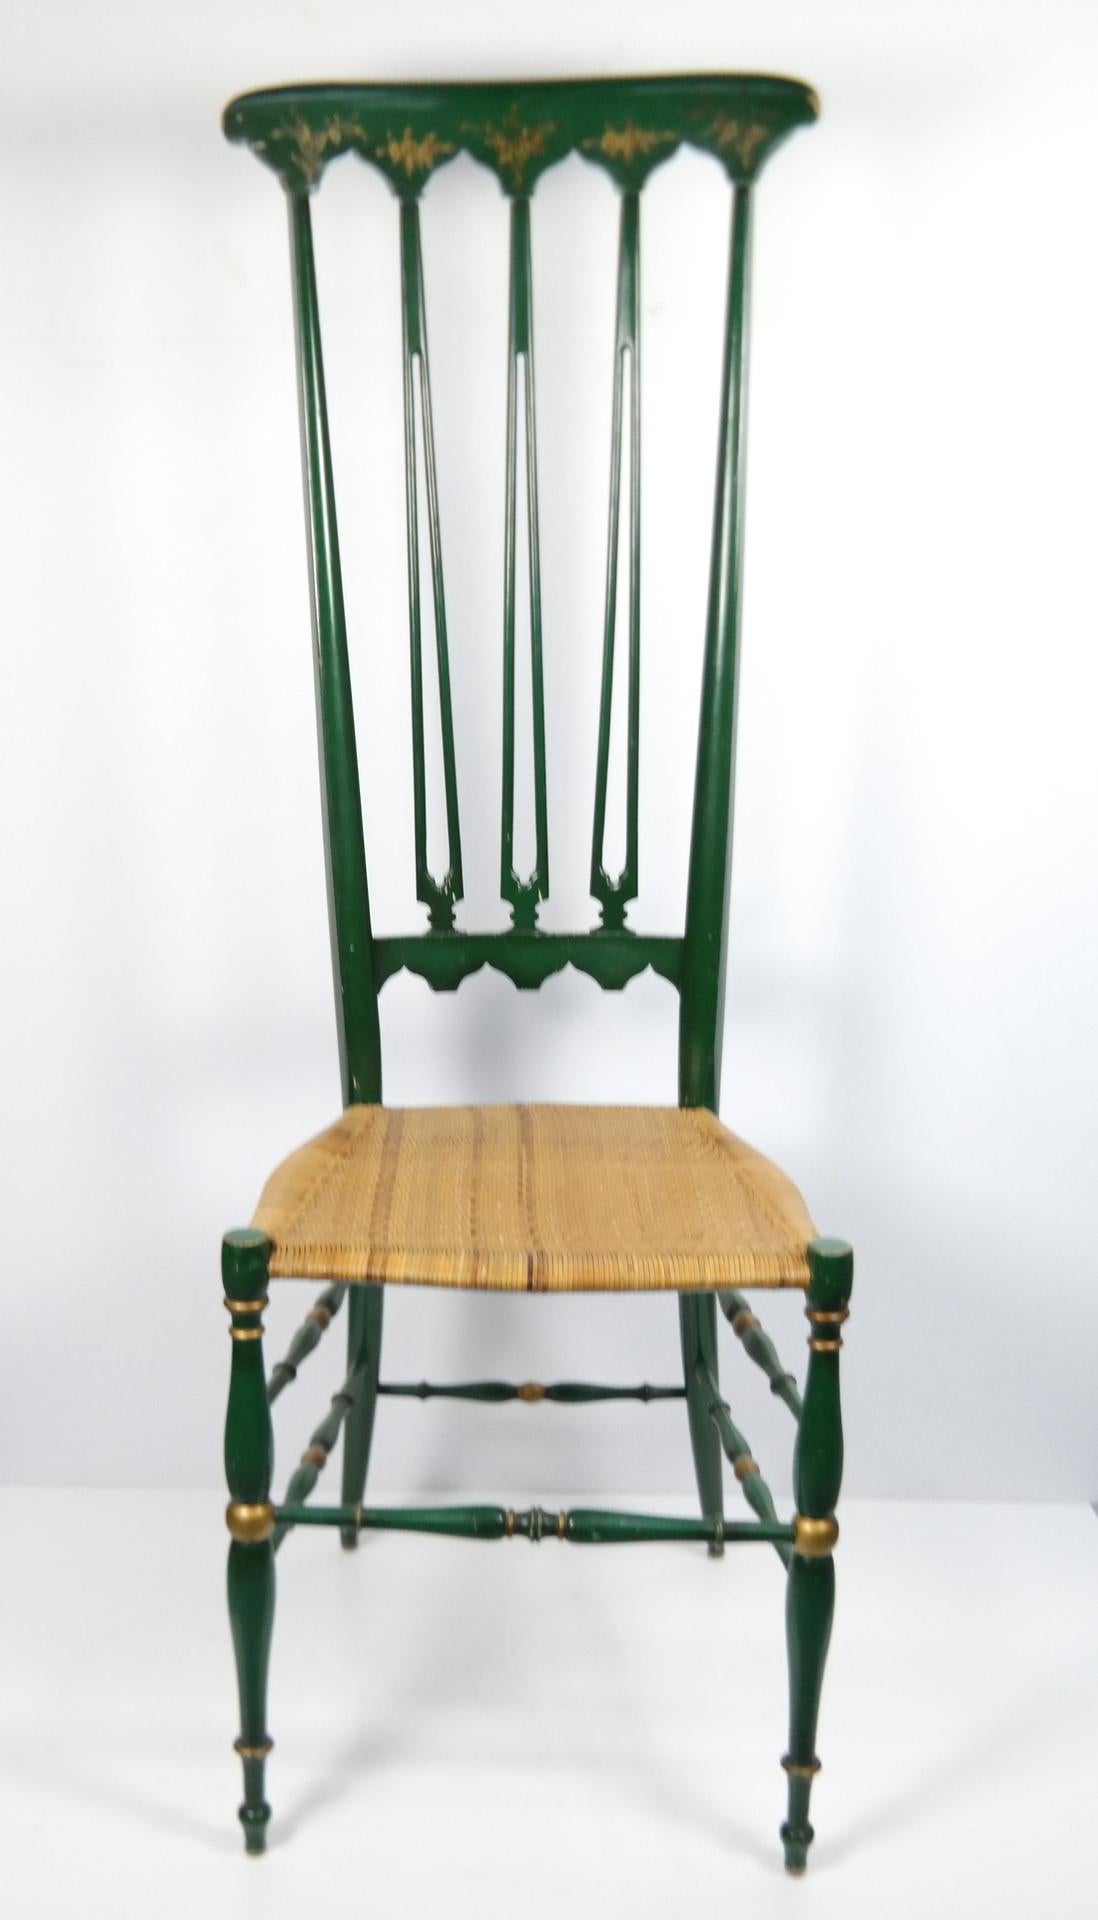 Pair of Chiavari Chairs, 1950s Italian Design, Original Paint and Cane Seats In Good Condition For Sale In Budapest, HU